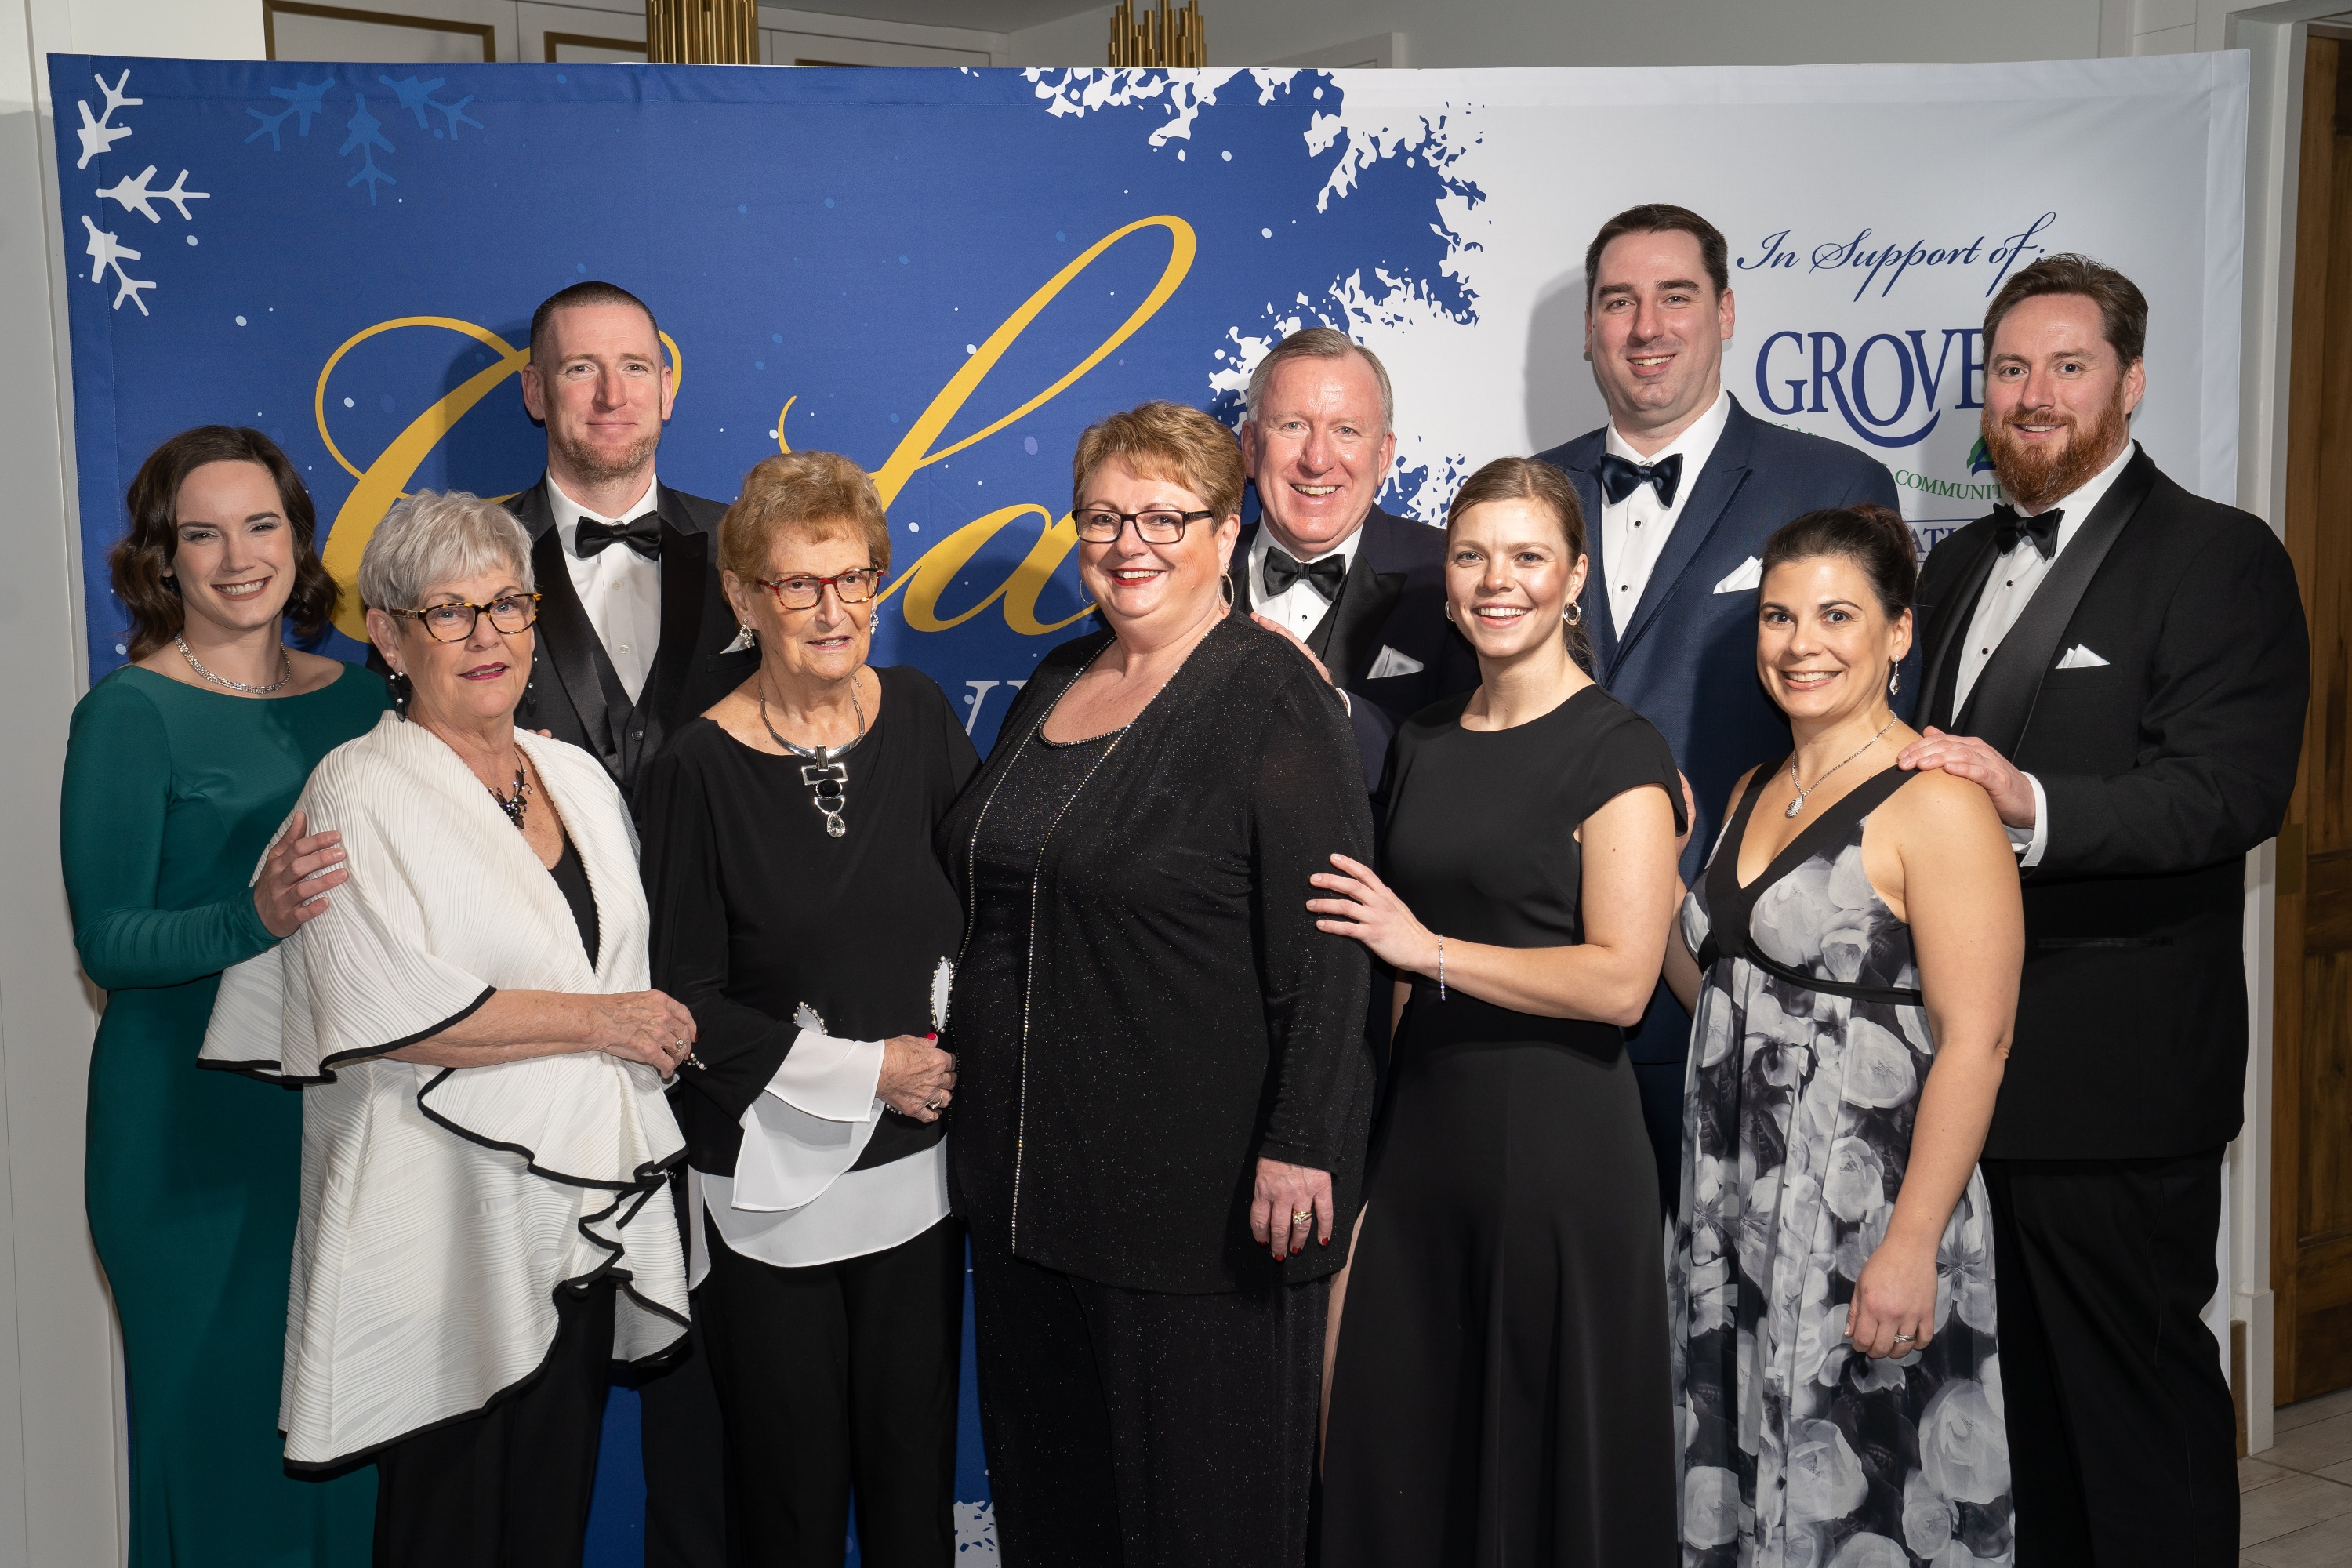 Bob & Lynn Cameron, owners of Heritage River Retirement Residence and Dinner Sponsors for the Gala, and their family